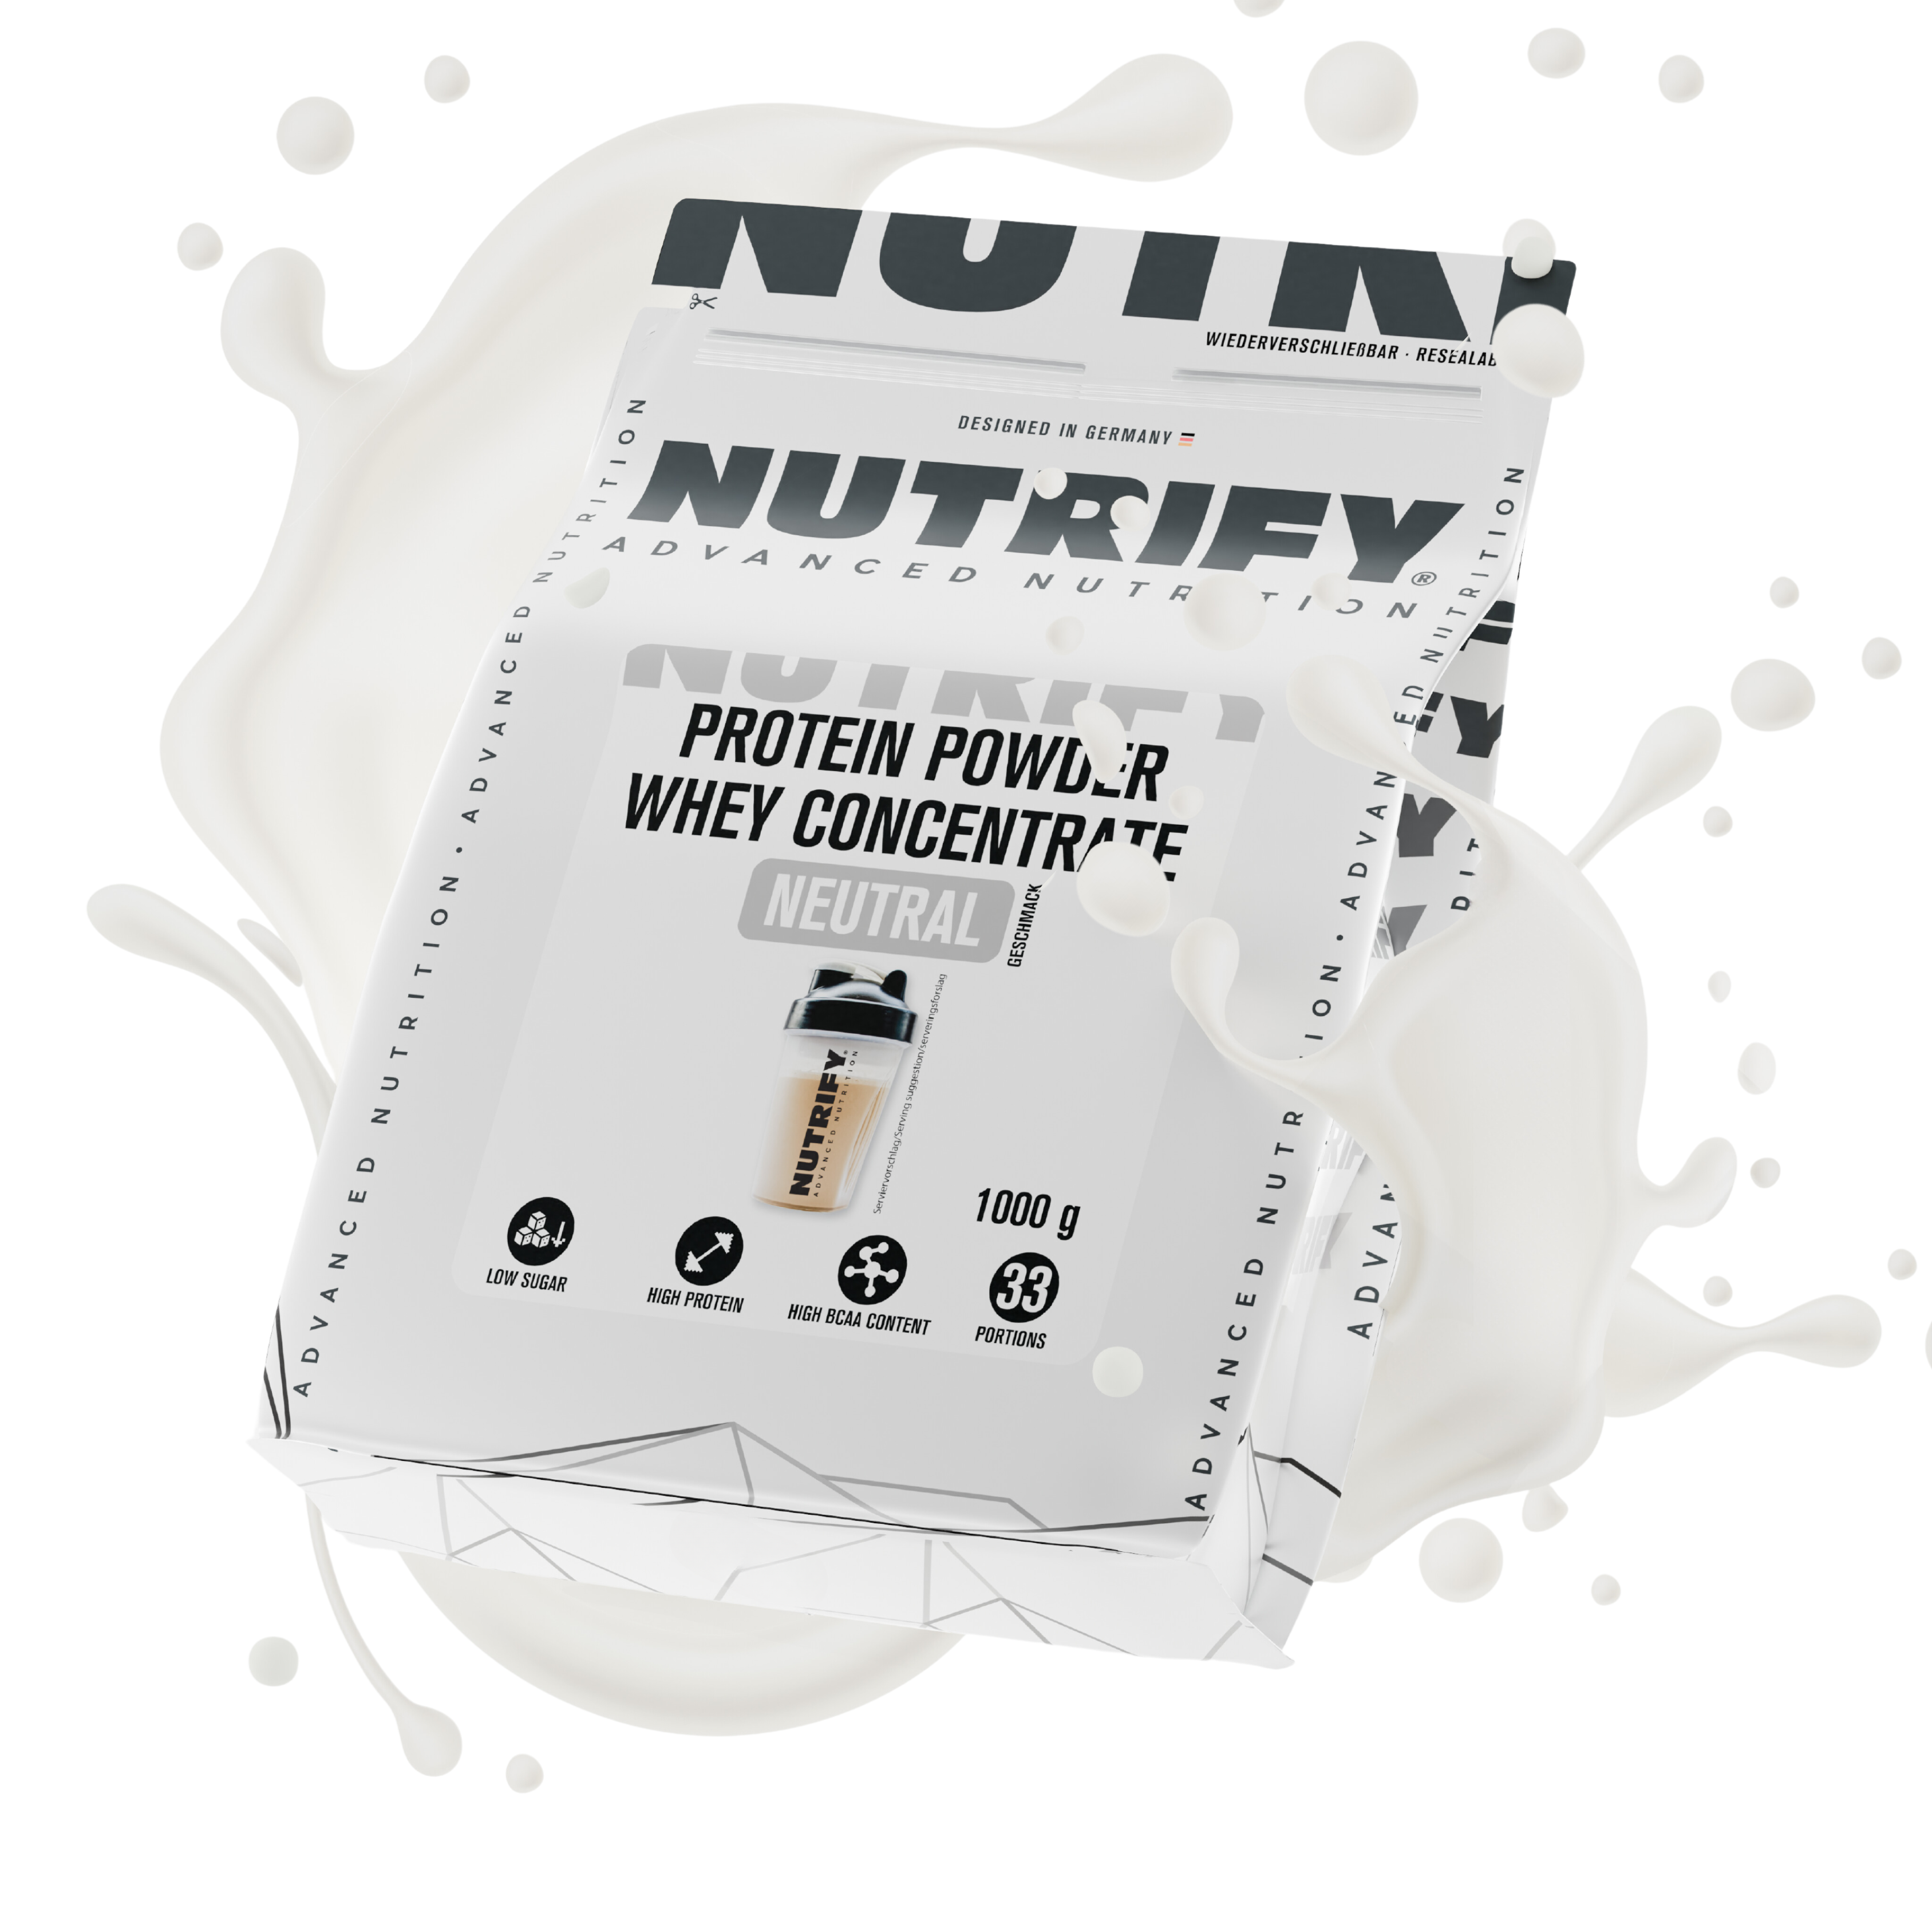 NUTRIFY Proteinpulver Whey Concentrate Neutral 2x1kg